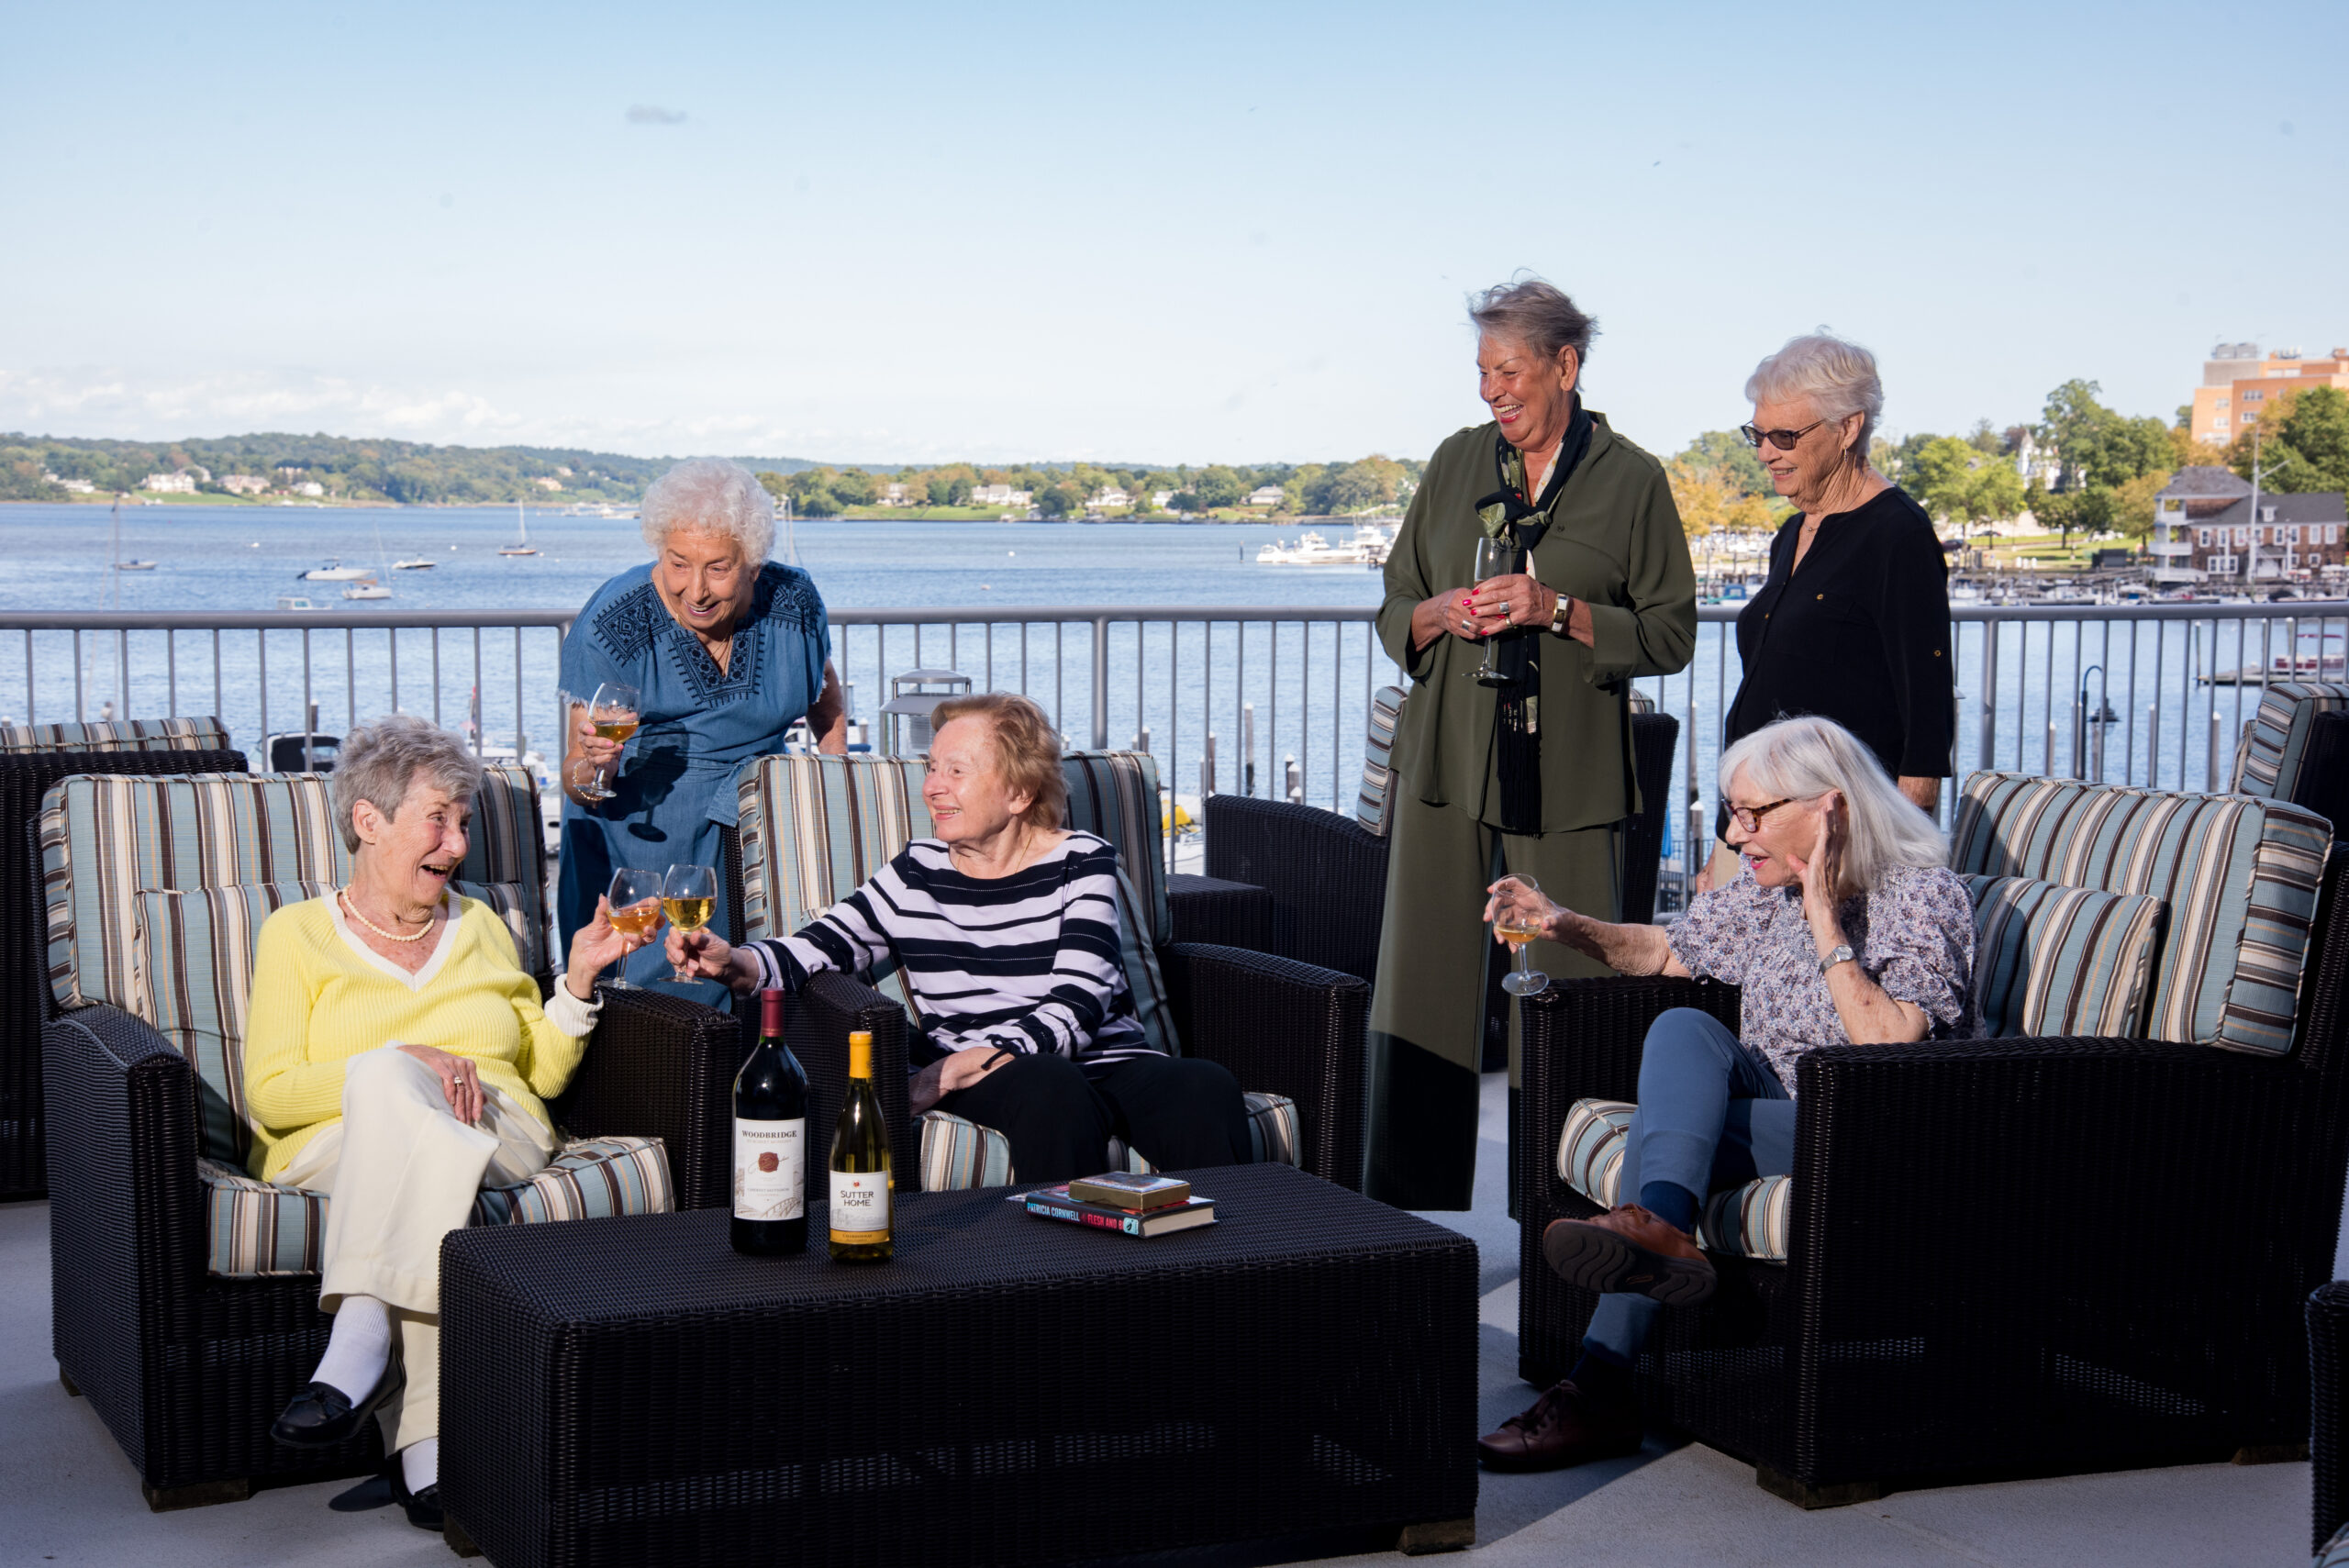 Group of residents enjoying drinks overlooking the Navesink River